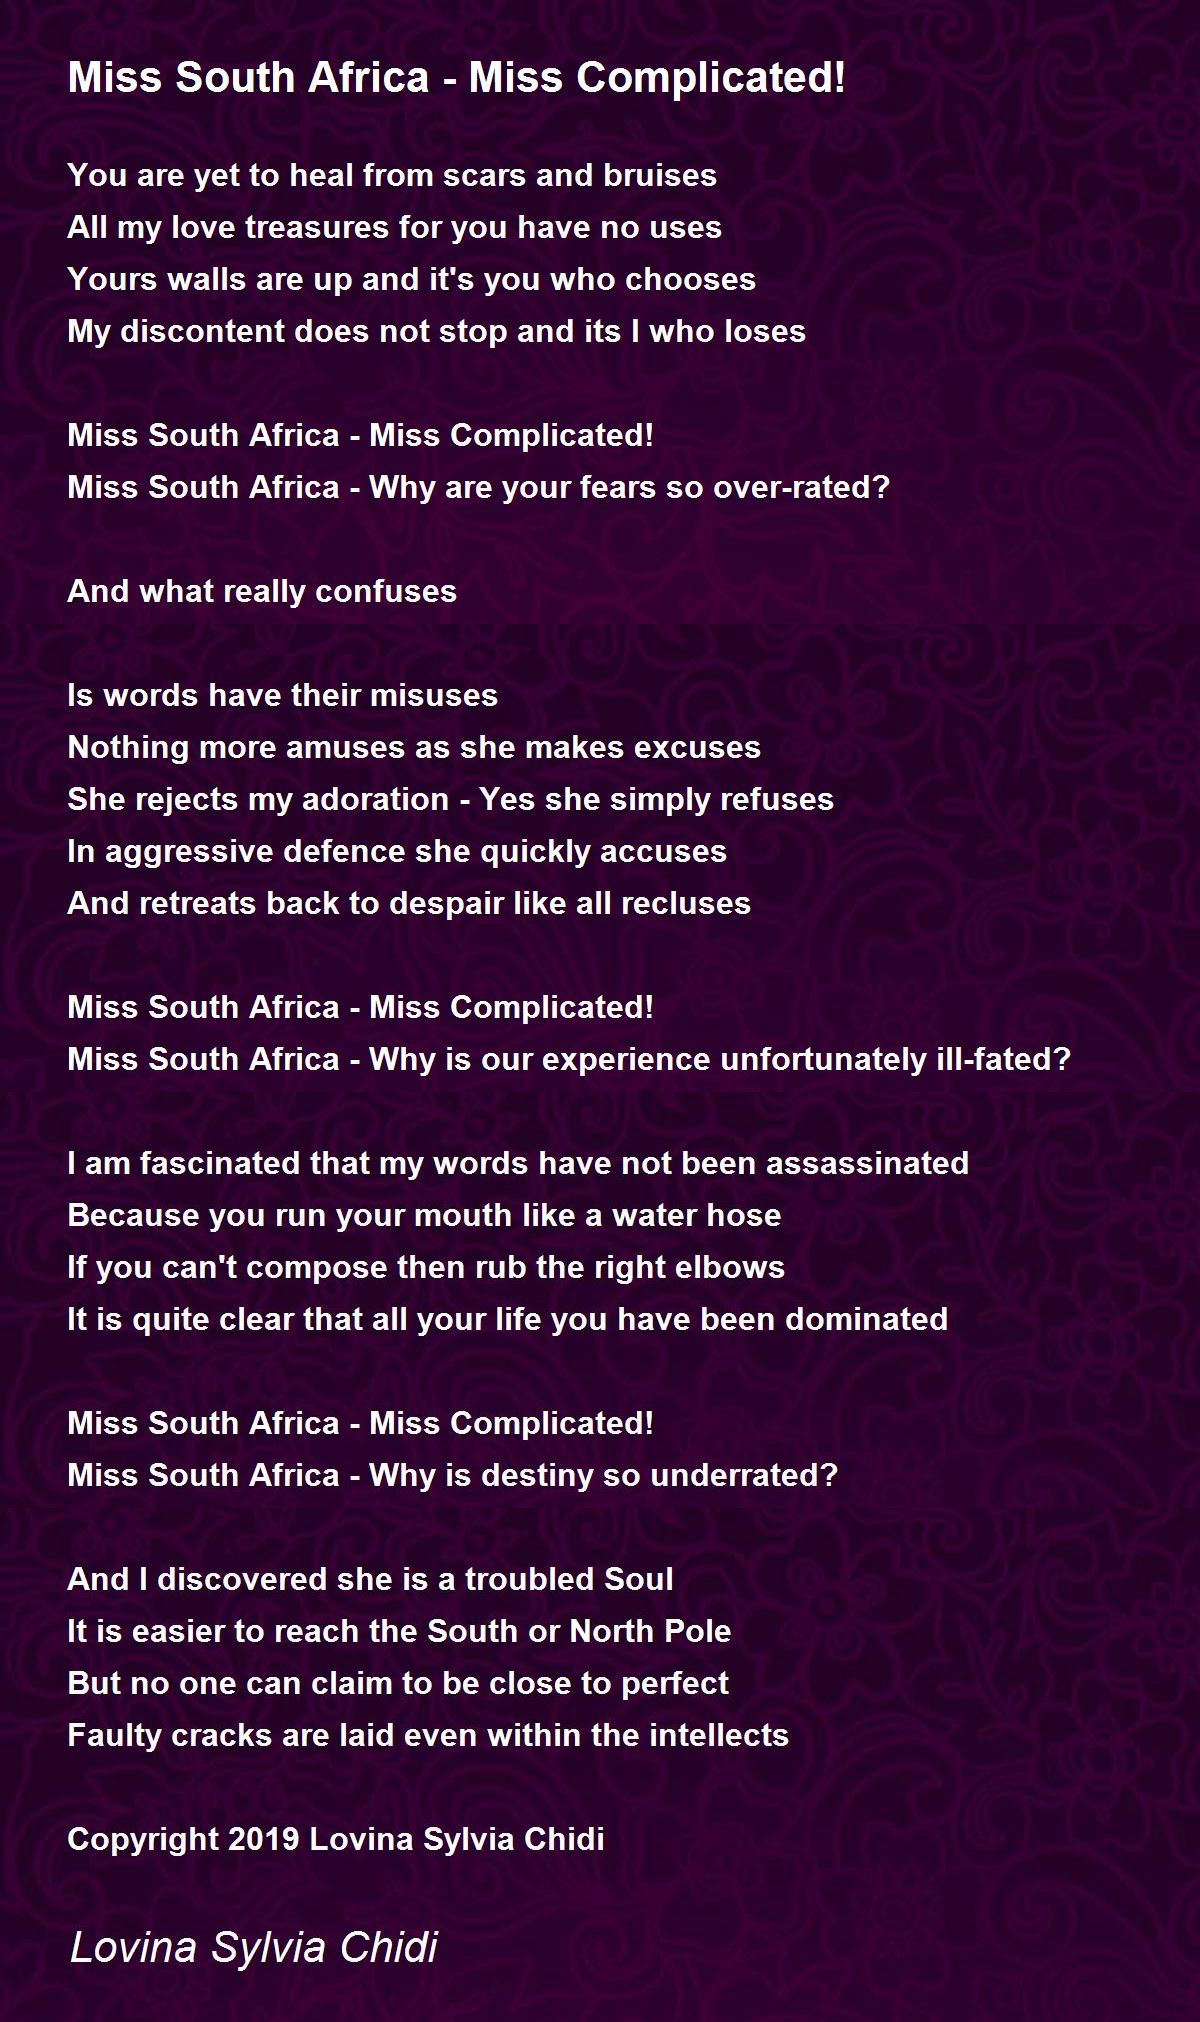 Miss South Africa - Miss Complicated! - Miss South Africa - Miss